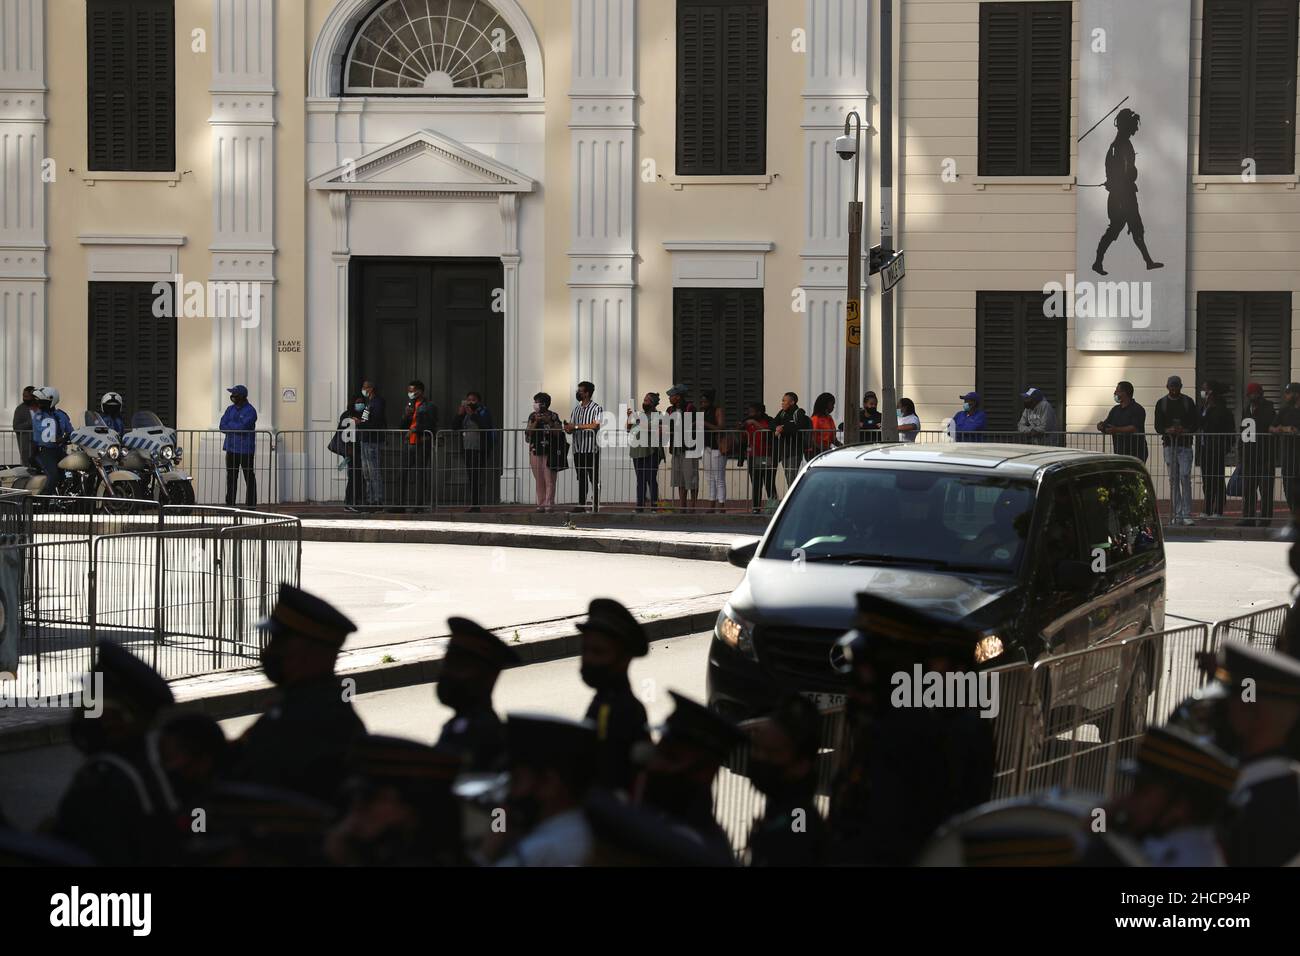 A hearse with the casket containing the body of Archbishop Desmond Tutu arrives at St. Georges Cathedral for his lying in state, in Cape Town, South Africa, December 31, 2021. REUTERS/Mike Hutchings Stock Photo